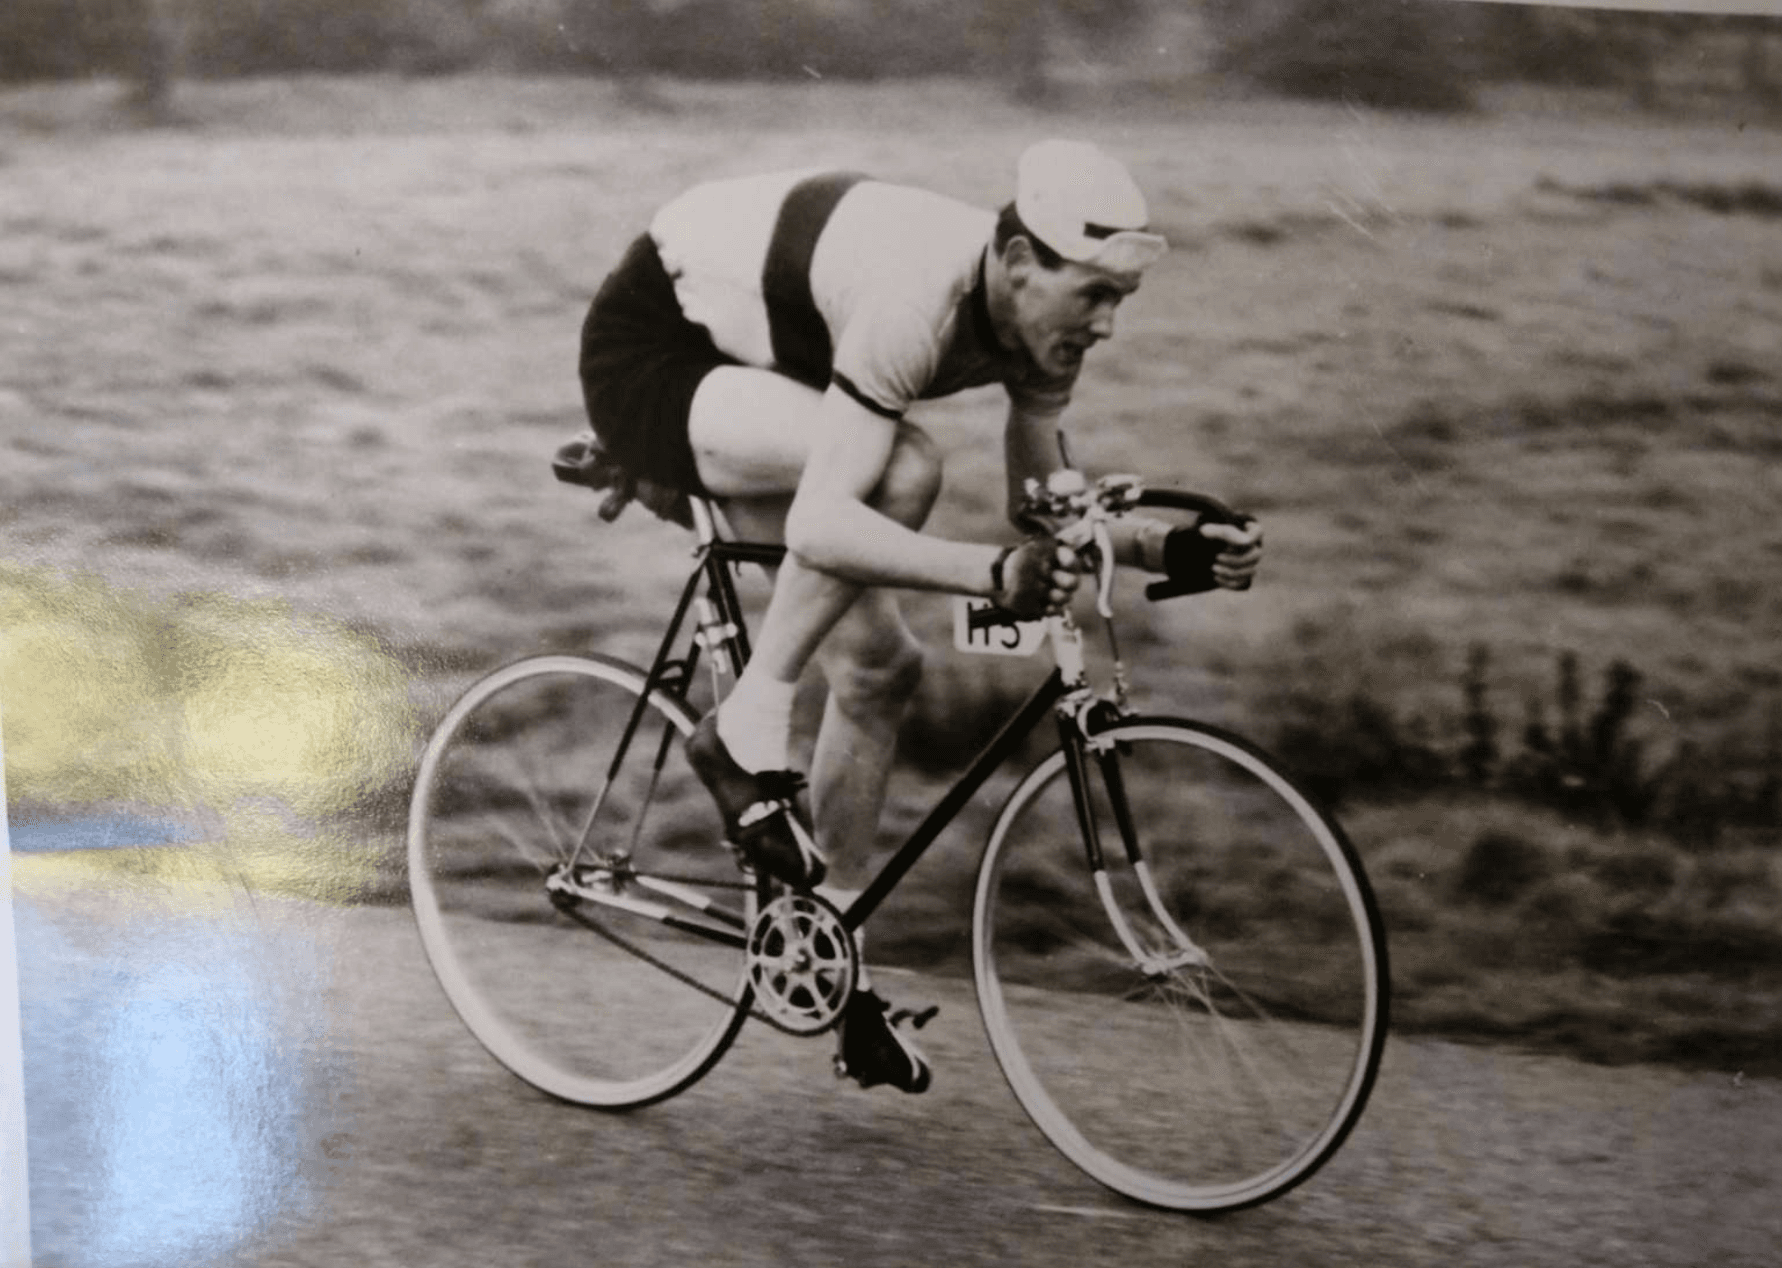 A man on a bicycle on a black and white photo.